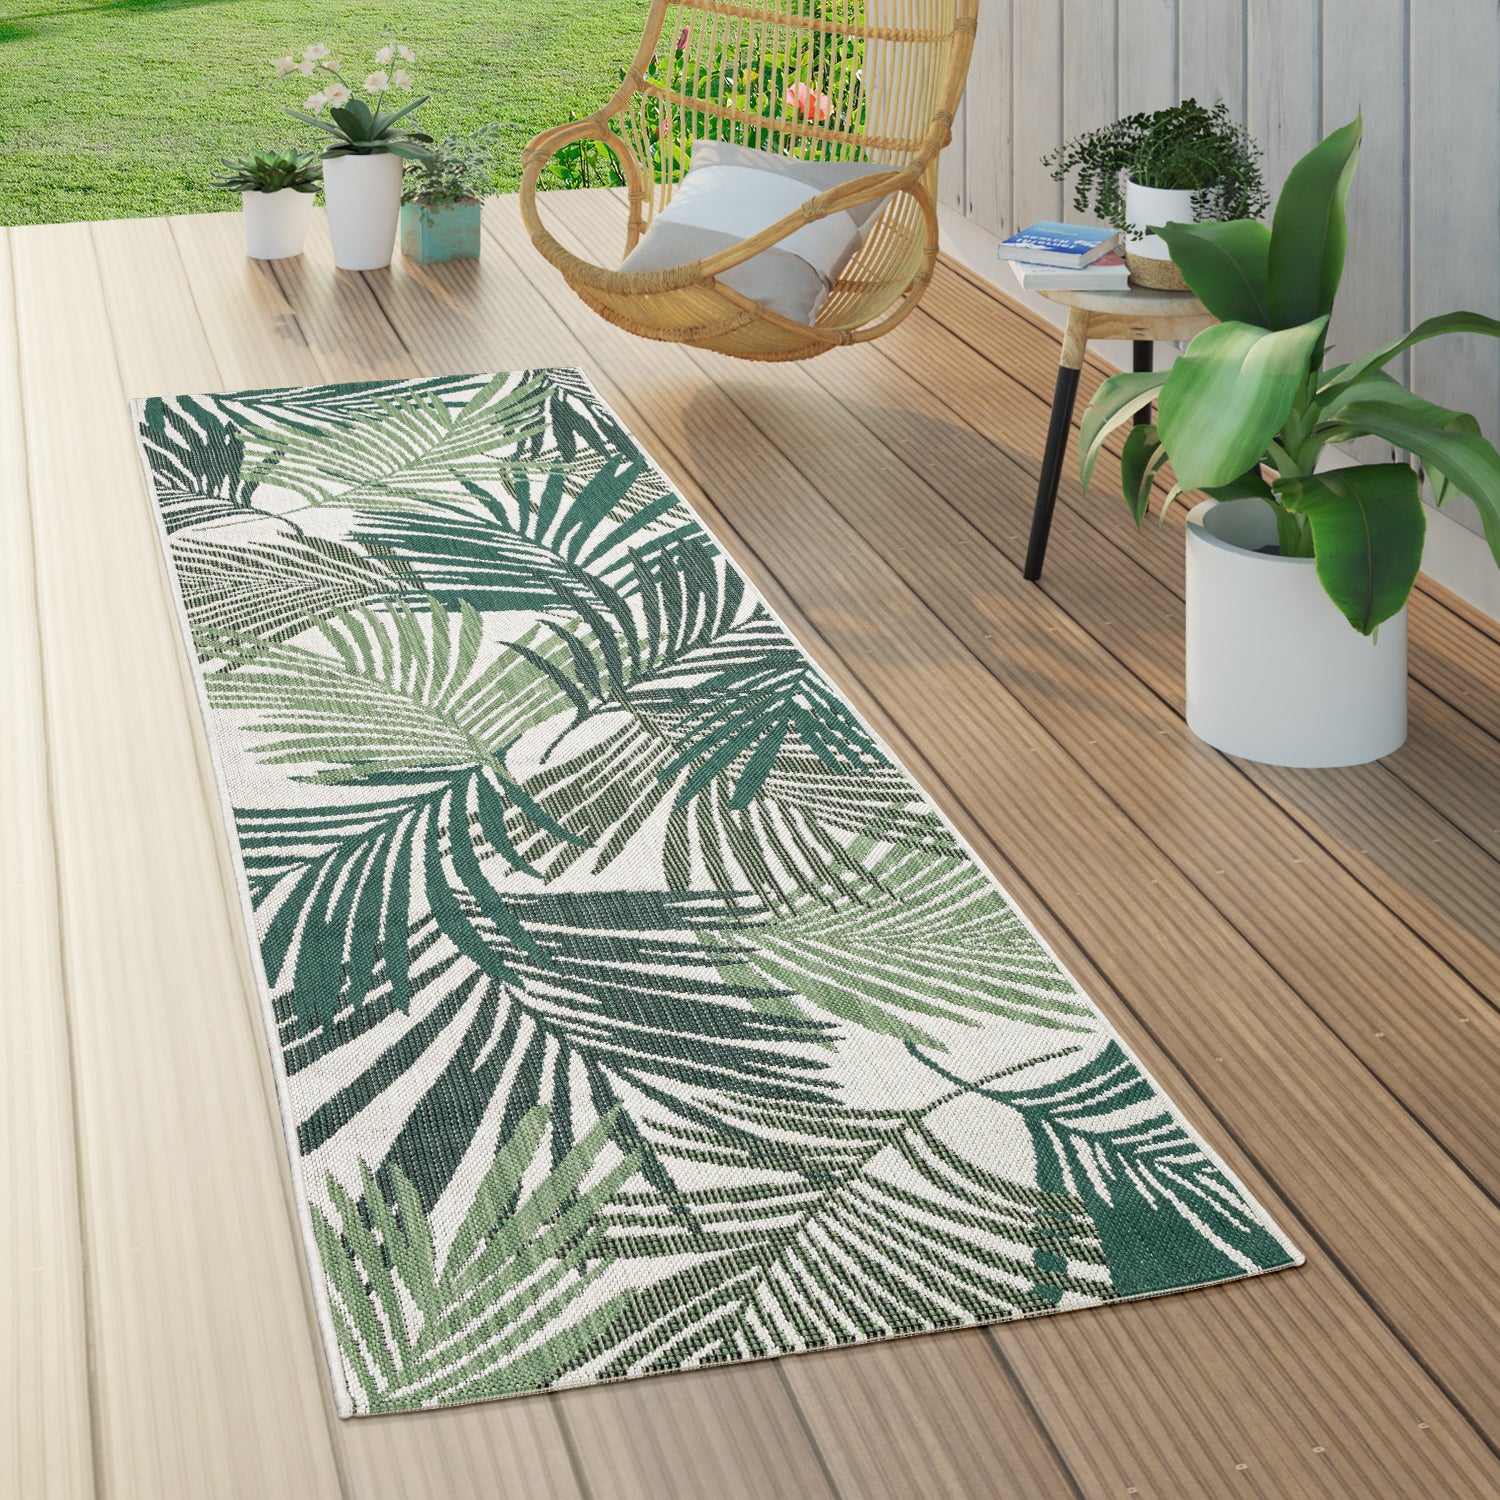 OSTENDE 534 GREEN – Paco Home Rugs